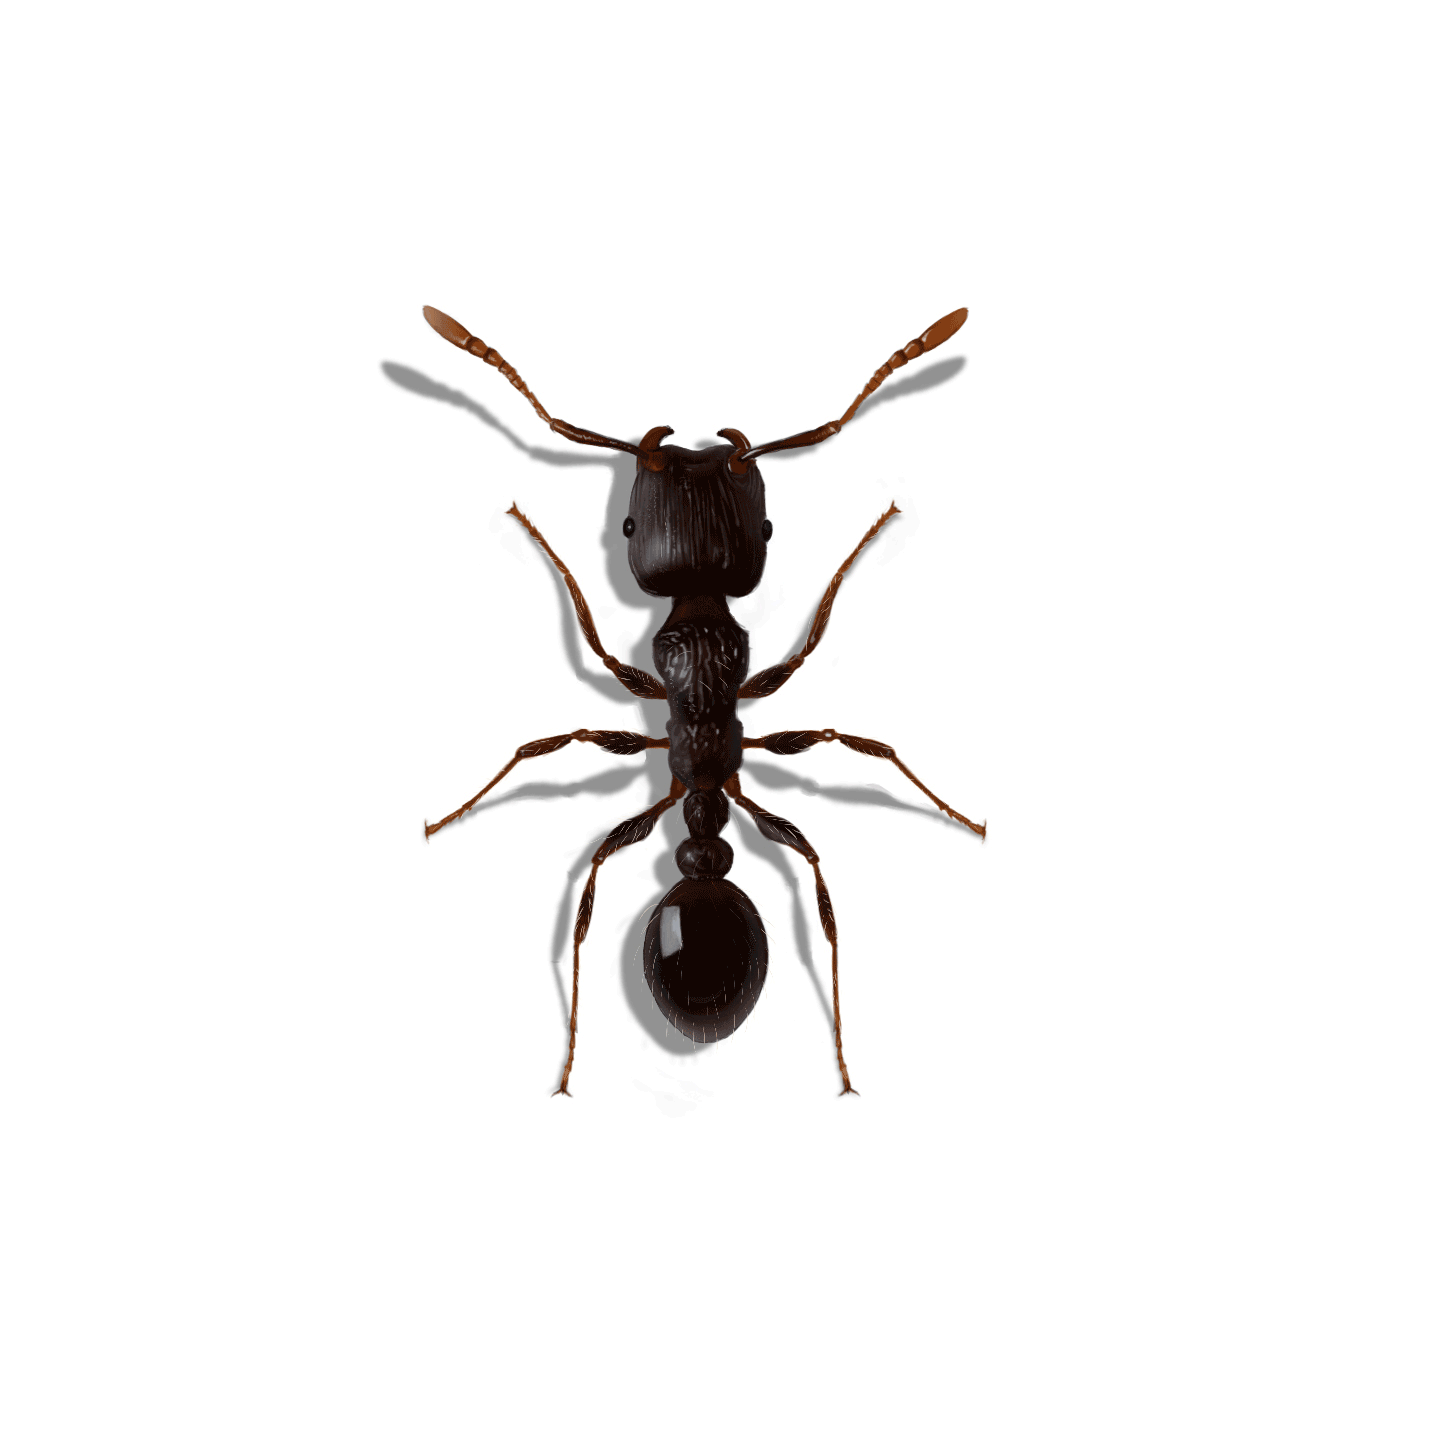 Illustration of a Pavement Ant